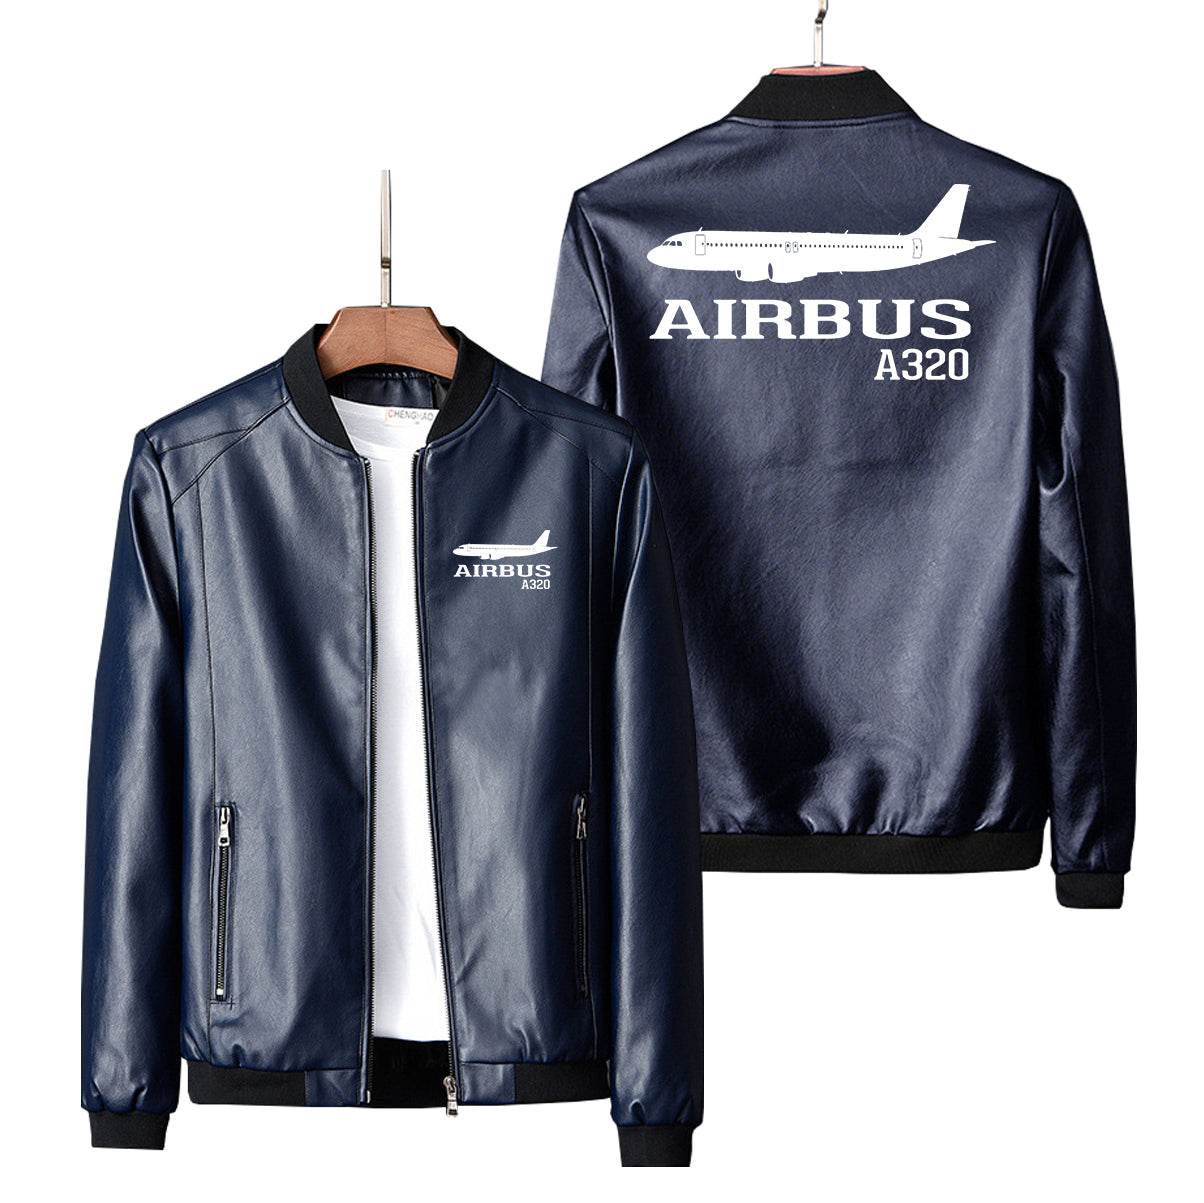 Airbus A320 Printed Designed PU Leather Jackets